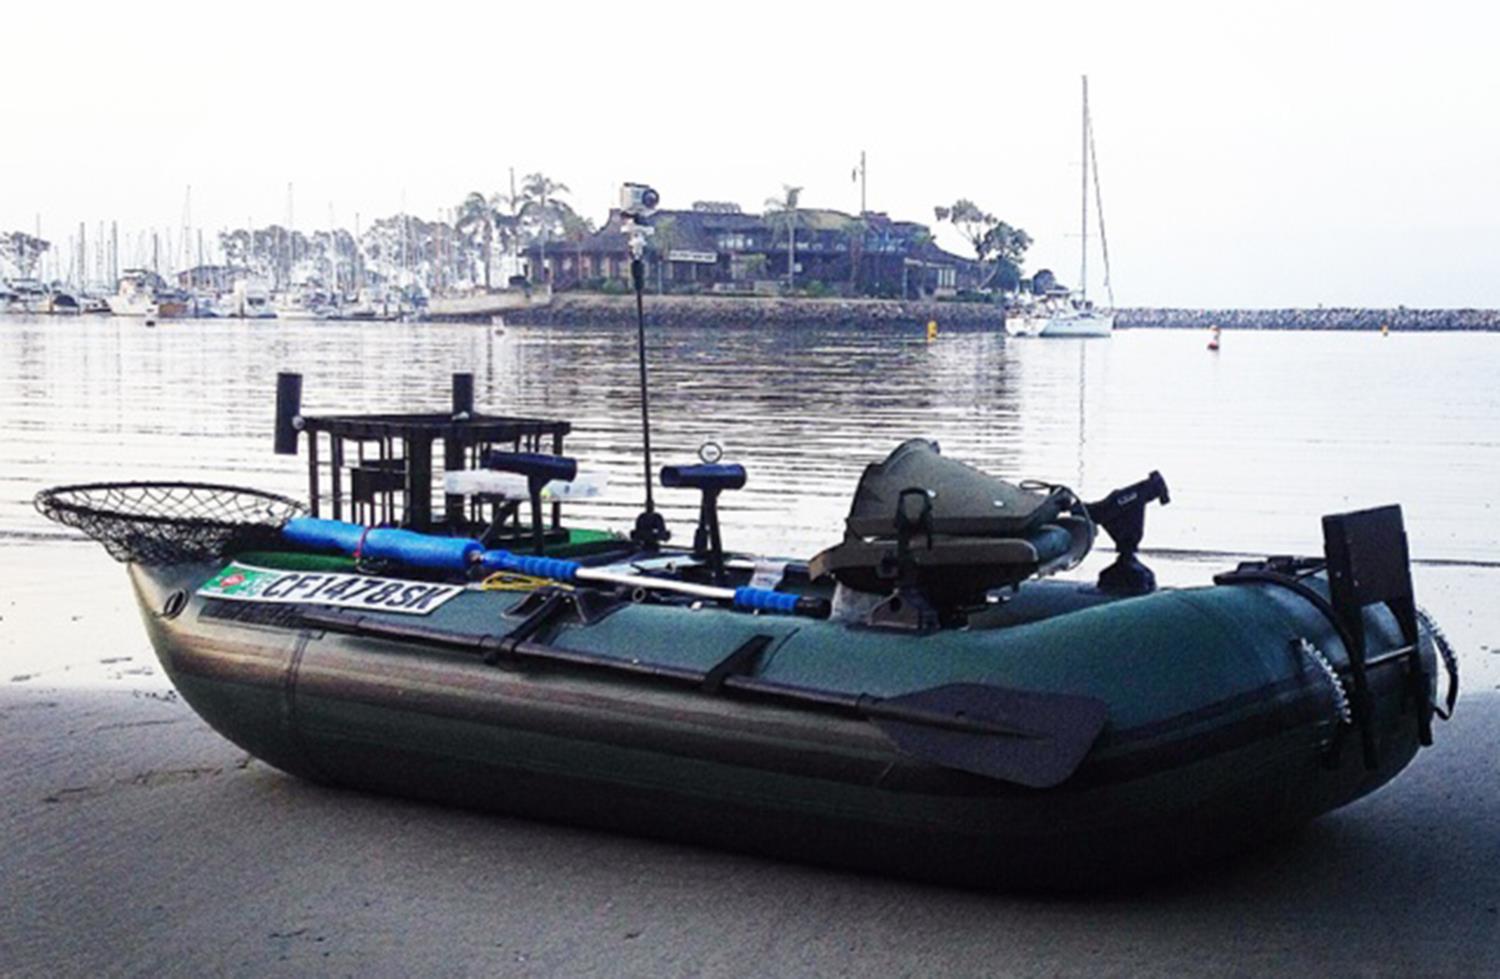 sea eagle 285fpb 1 person inflatable fishing boat. package